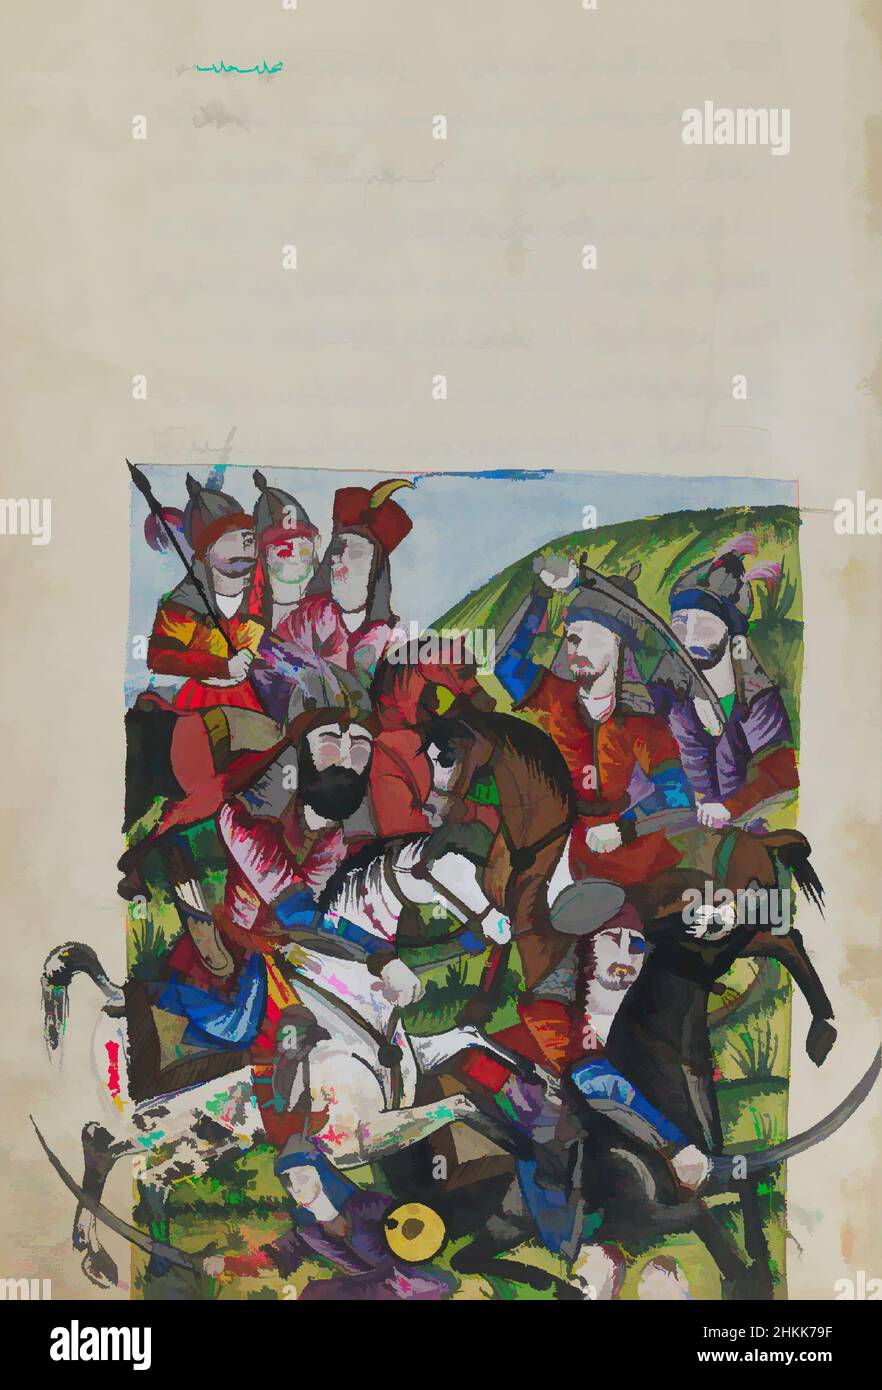 Art inspired by Miniature Painting, Ink on paper, 19th century, Qajar, Qajar Period, Writing: 5 3/4 x 3 3/4 in., 14.6 x 9.5 cm, 19th Century, battle, figures, folio, horse, horses, illumination, inscription, knights, manuscript, painting, Persian script, writing, Classic works modernized by Artotop with a splash of modernity. Shapes, color and value, eye-catching visual impact on art. Emotions through freedom of artworks in a contemporary way. A timeless message pursuing a wildly creative new direction. Artists turning to the digital medium and creating the Artotop NFT Stock Photo